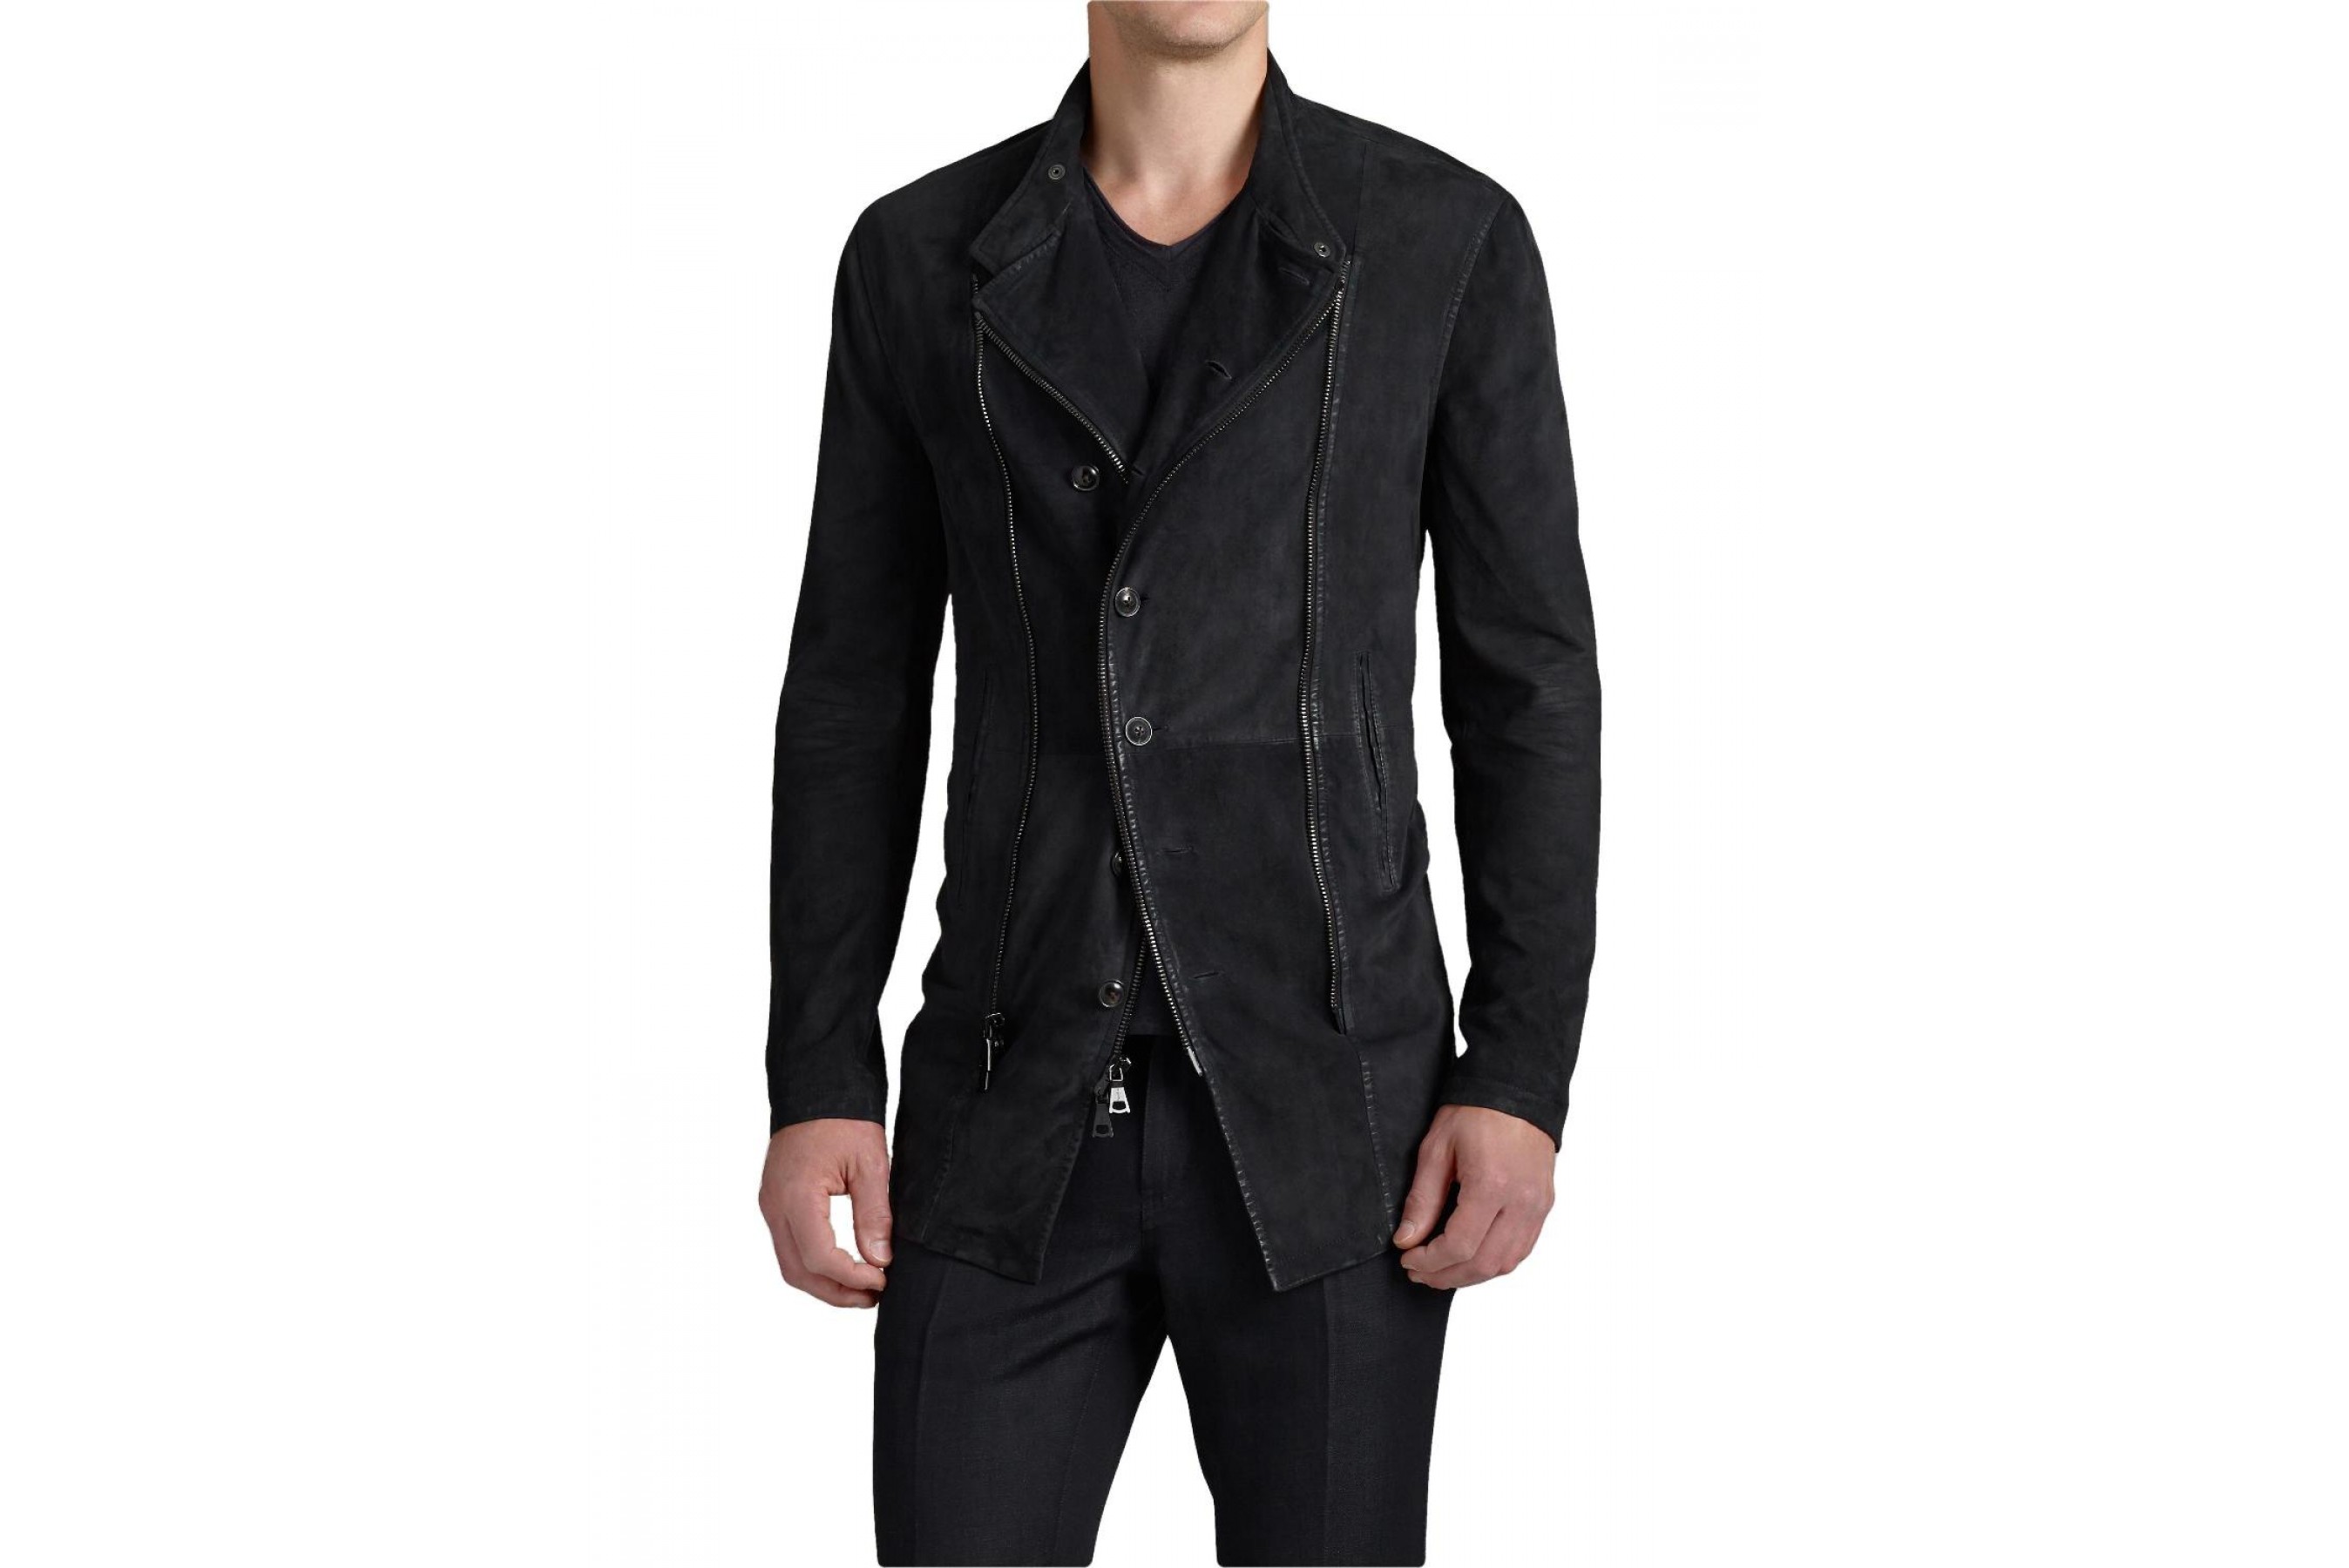 Limitless Brian Finch Black Suede Leather Jacket